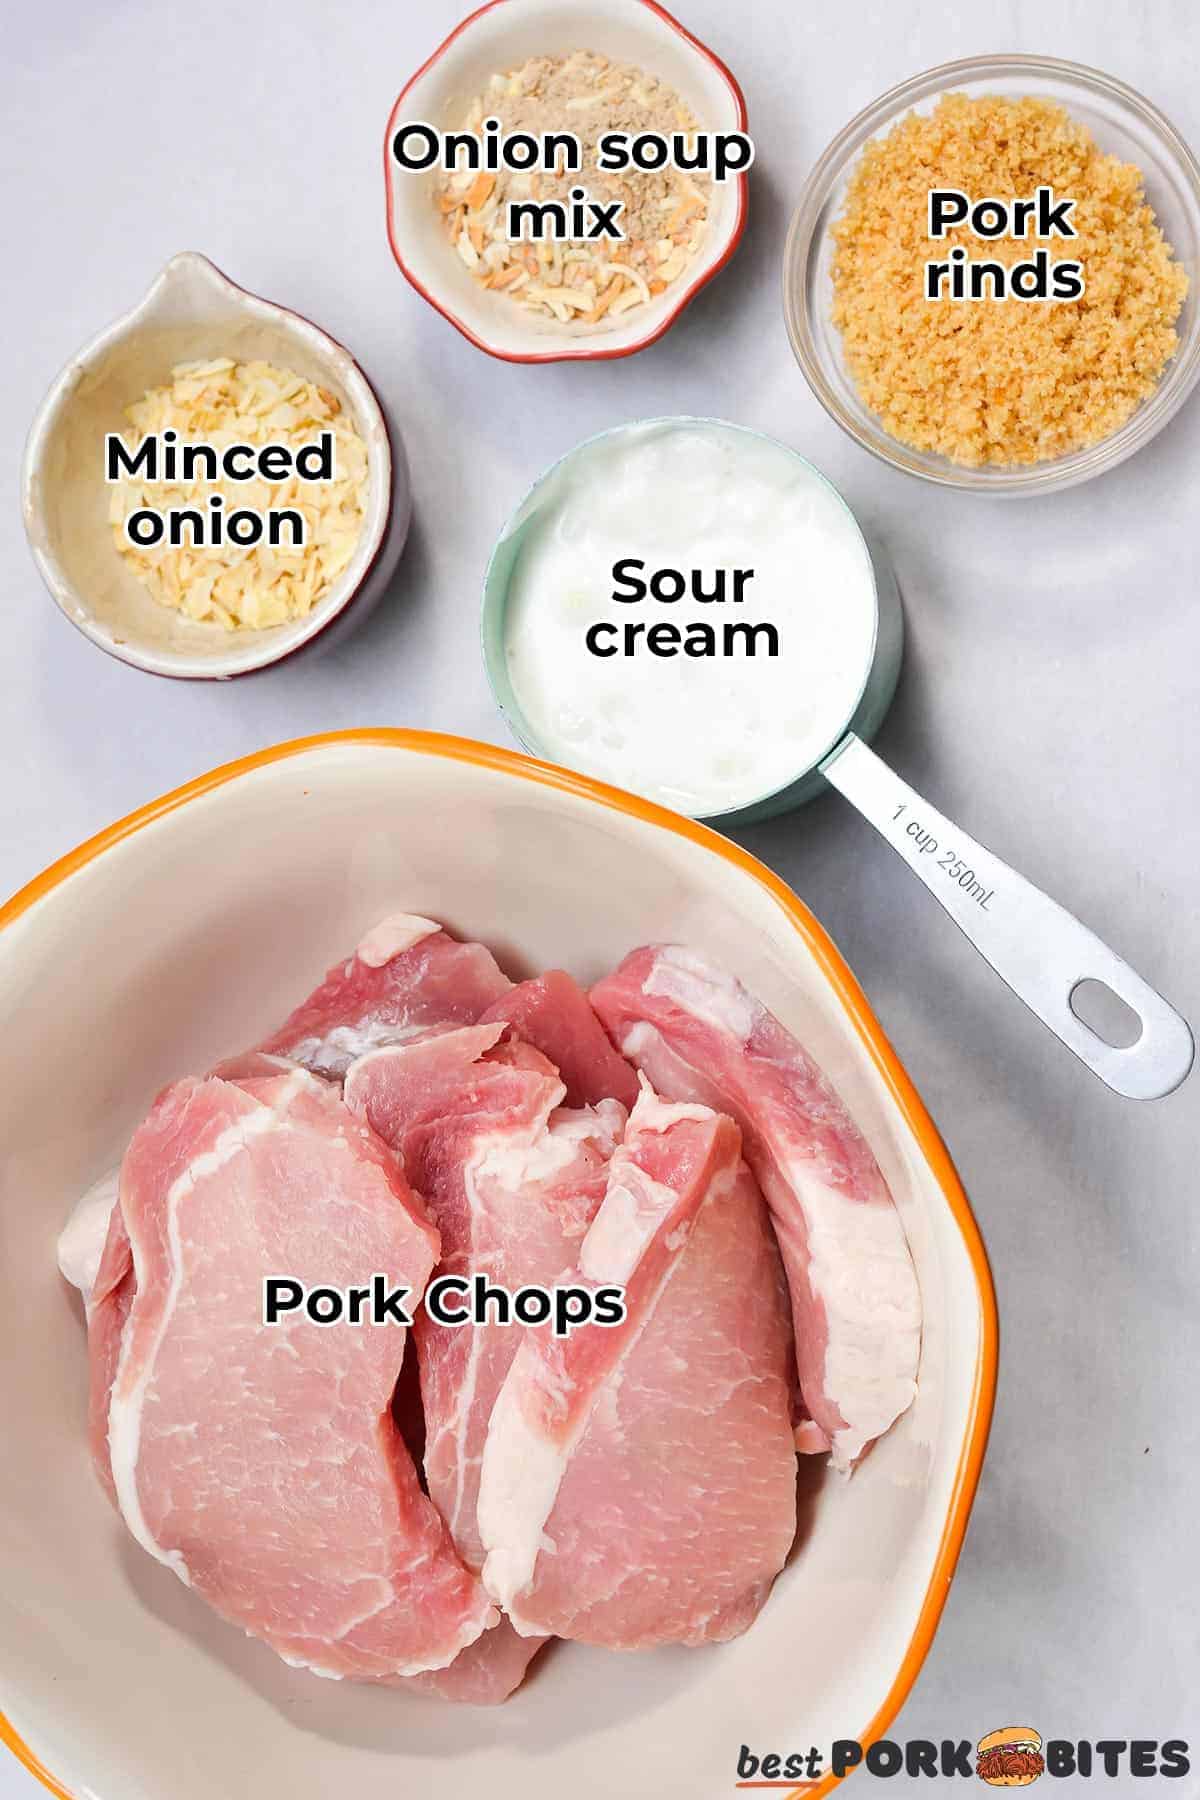 the ingredients for onion pork chops in separate bowls with labels